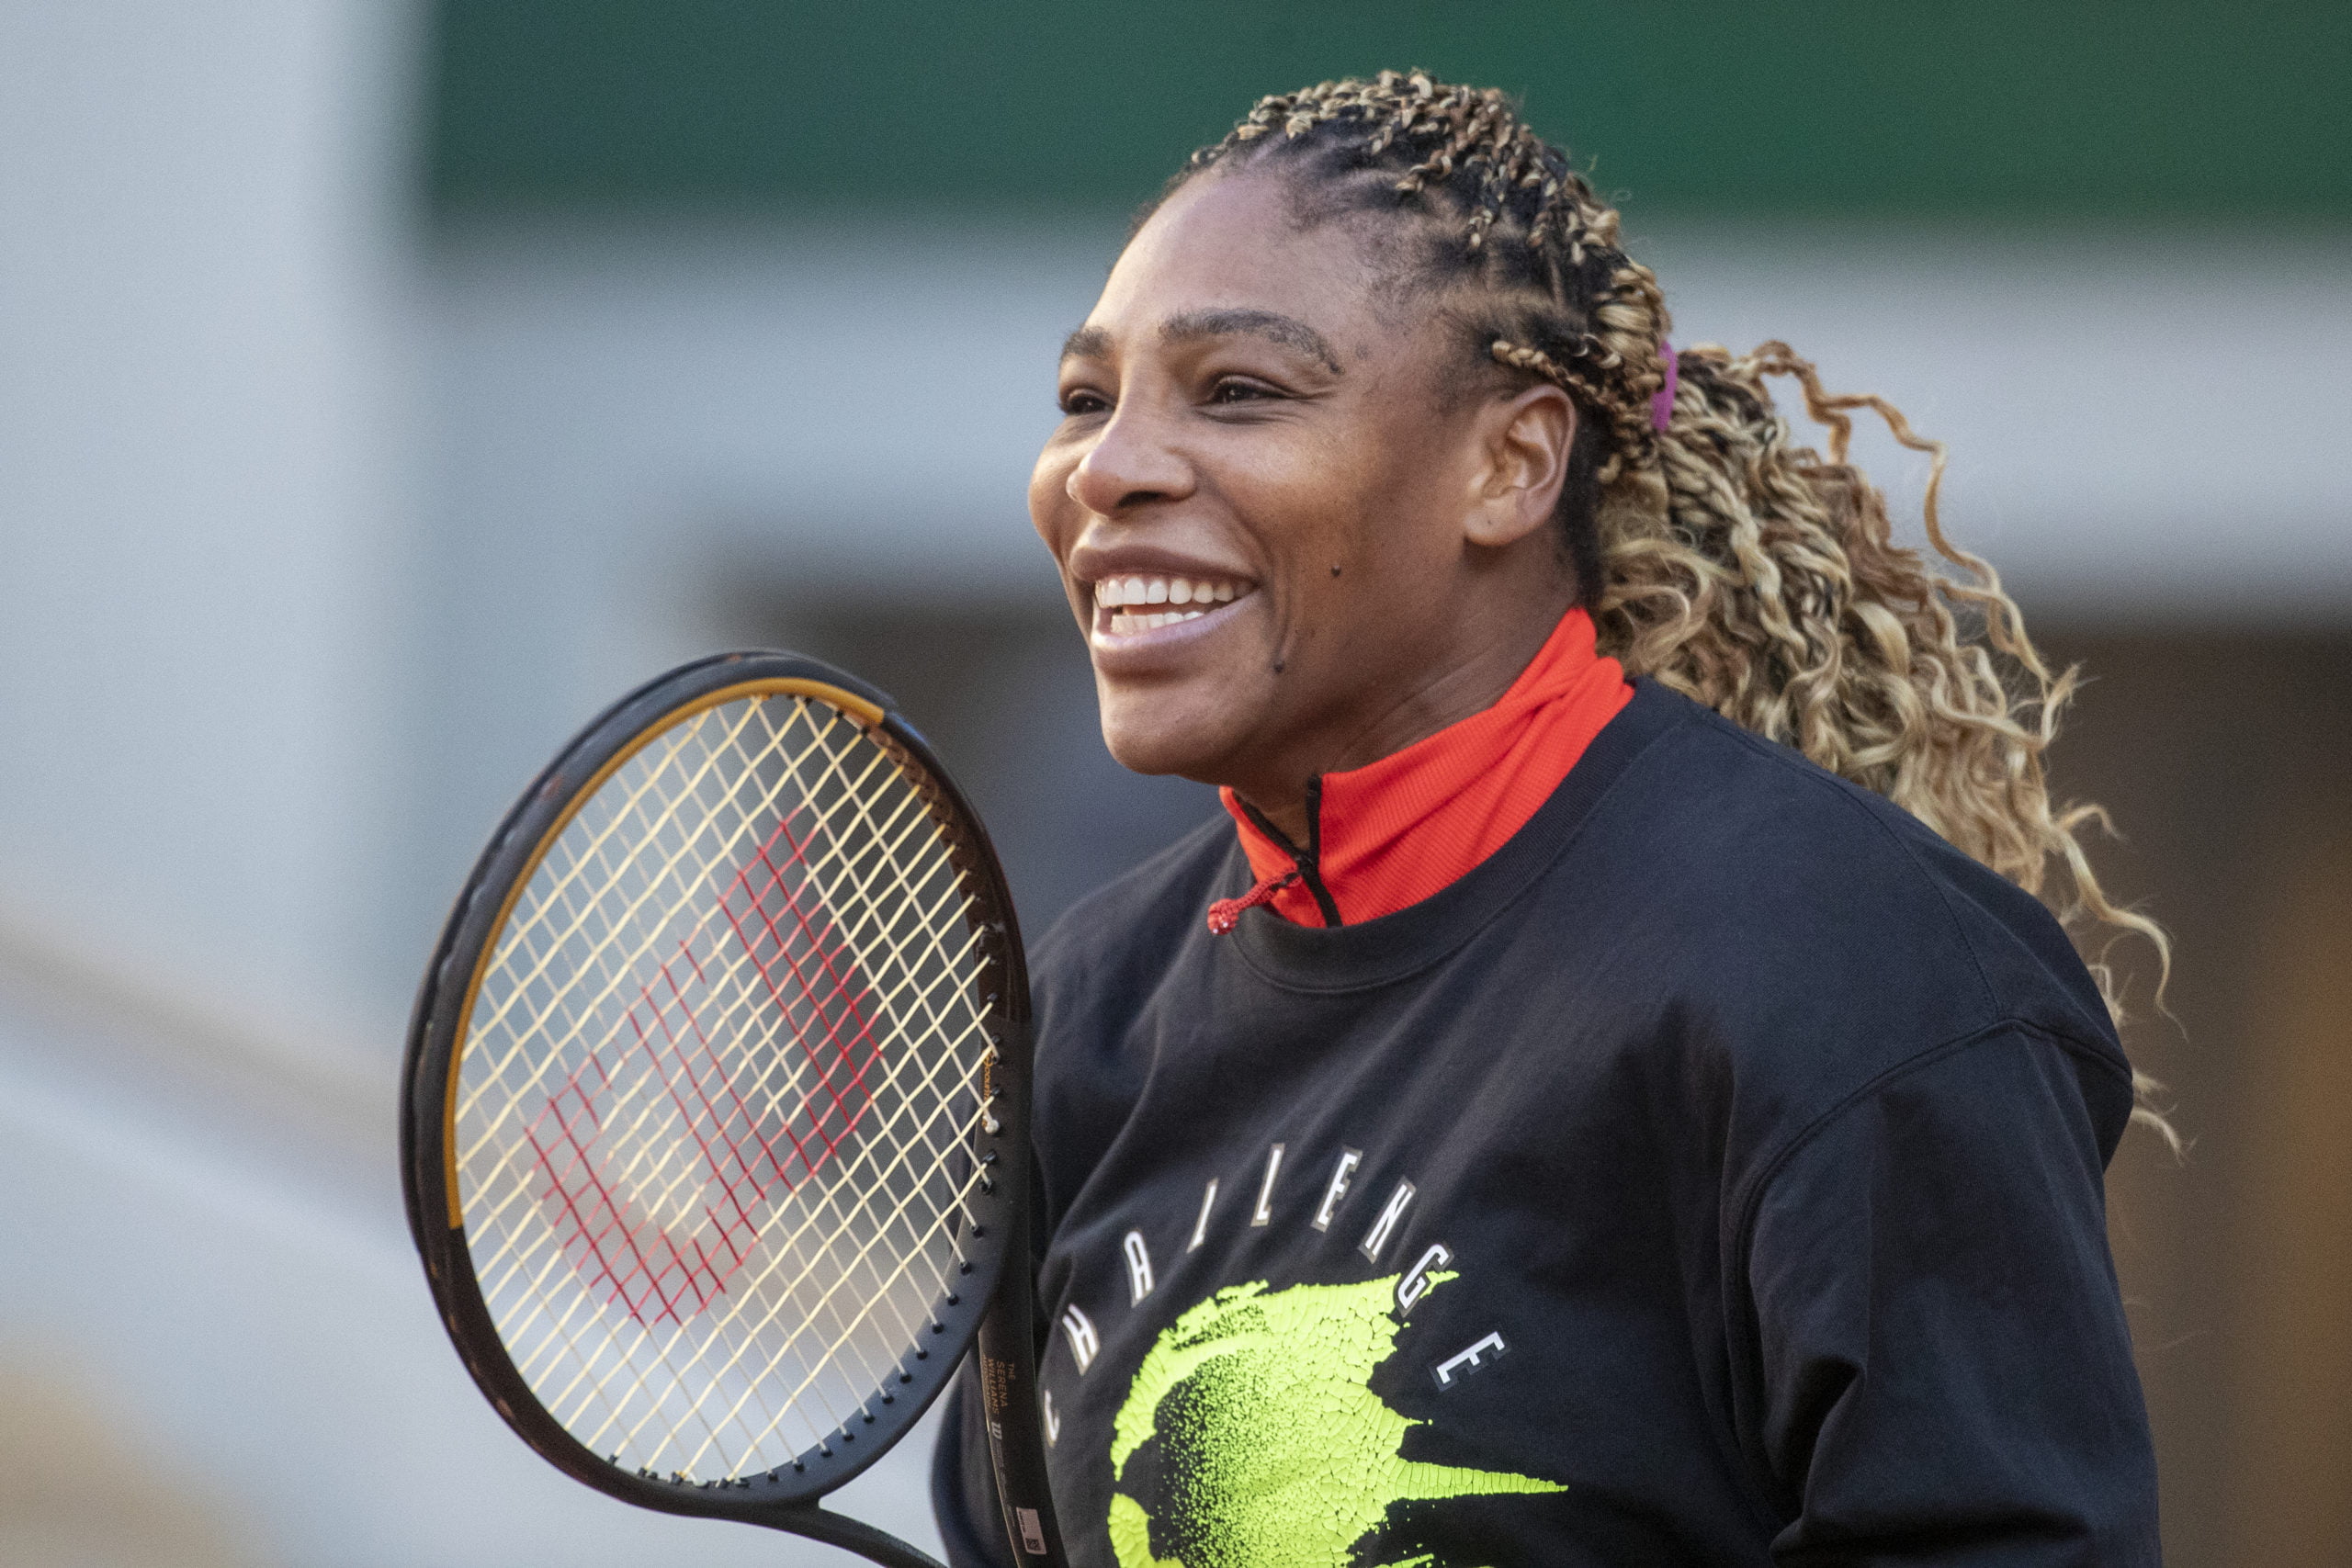 TSR Sports: Serena Williams Reportedly Withdraws From The French Open Due To An Achilles Injury